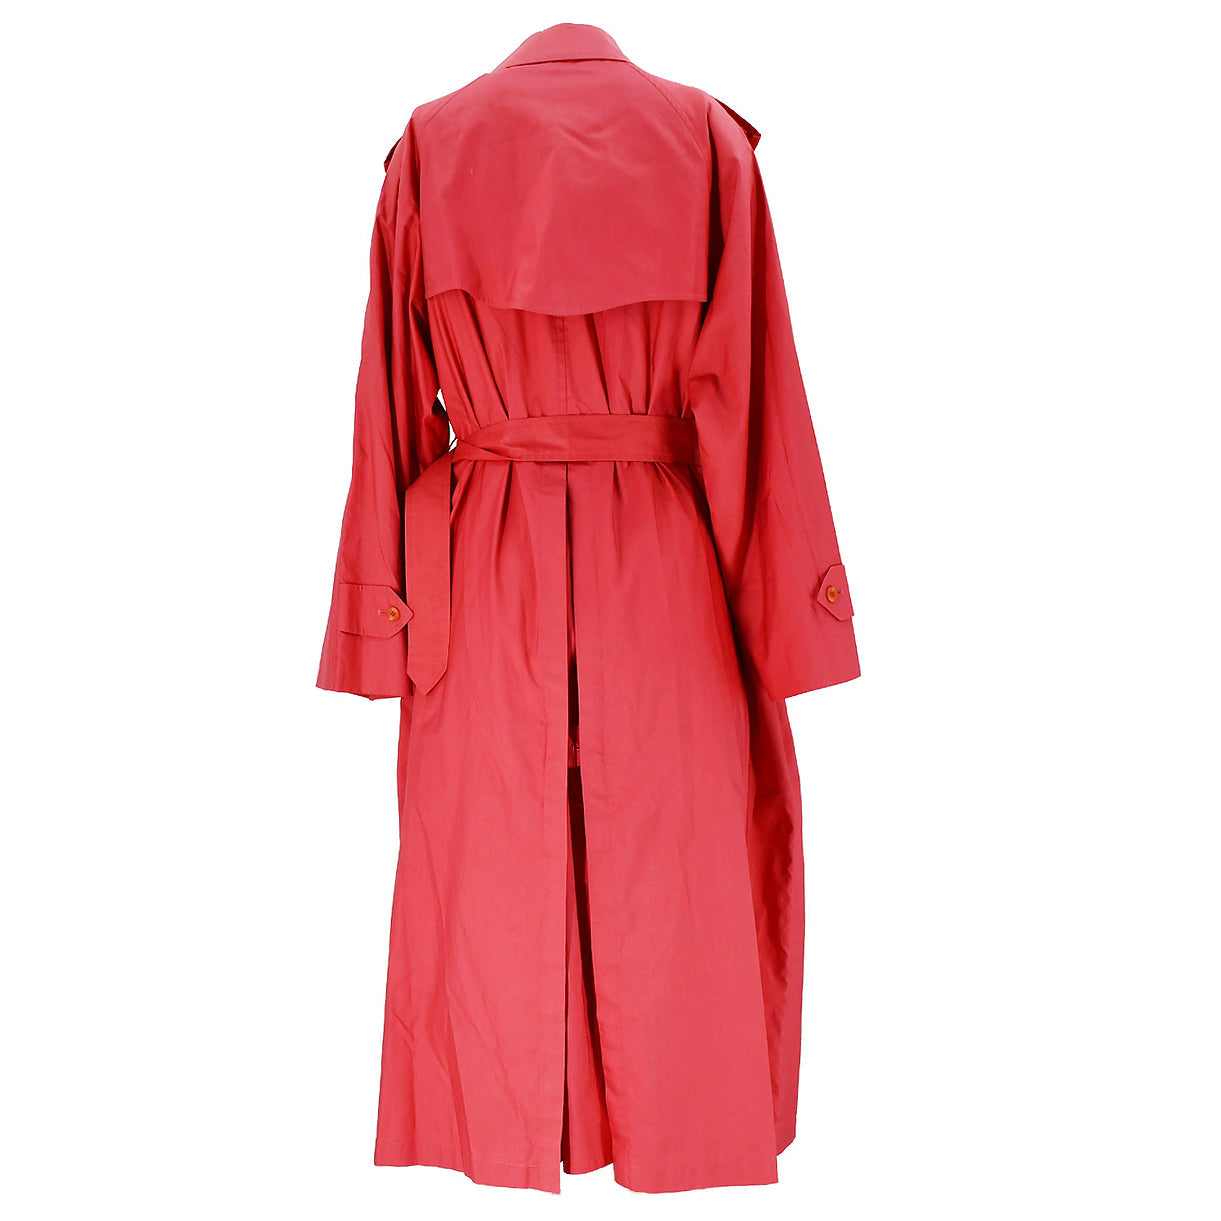 Burberrys Trench Coat Pink 